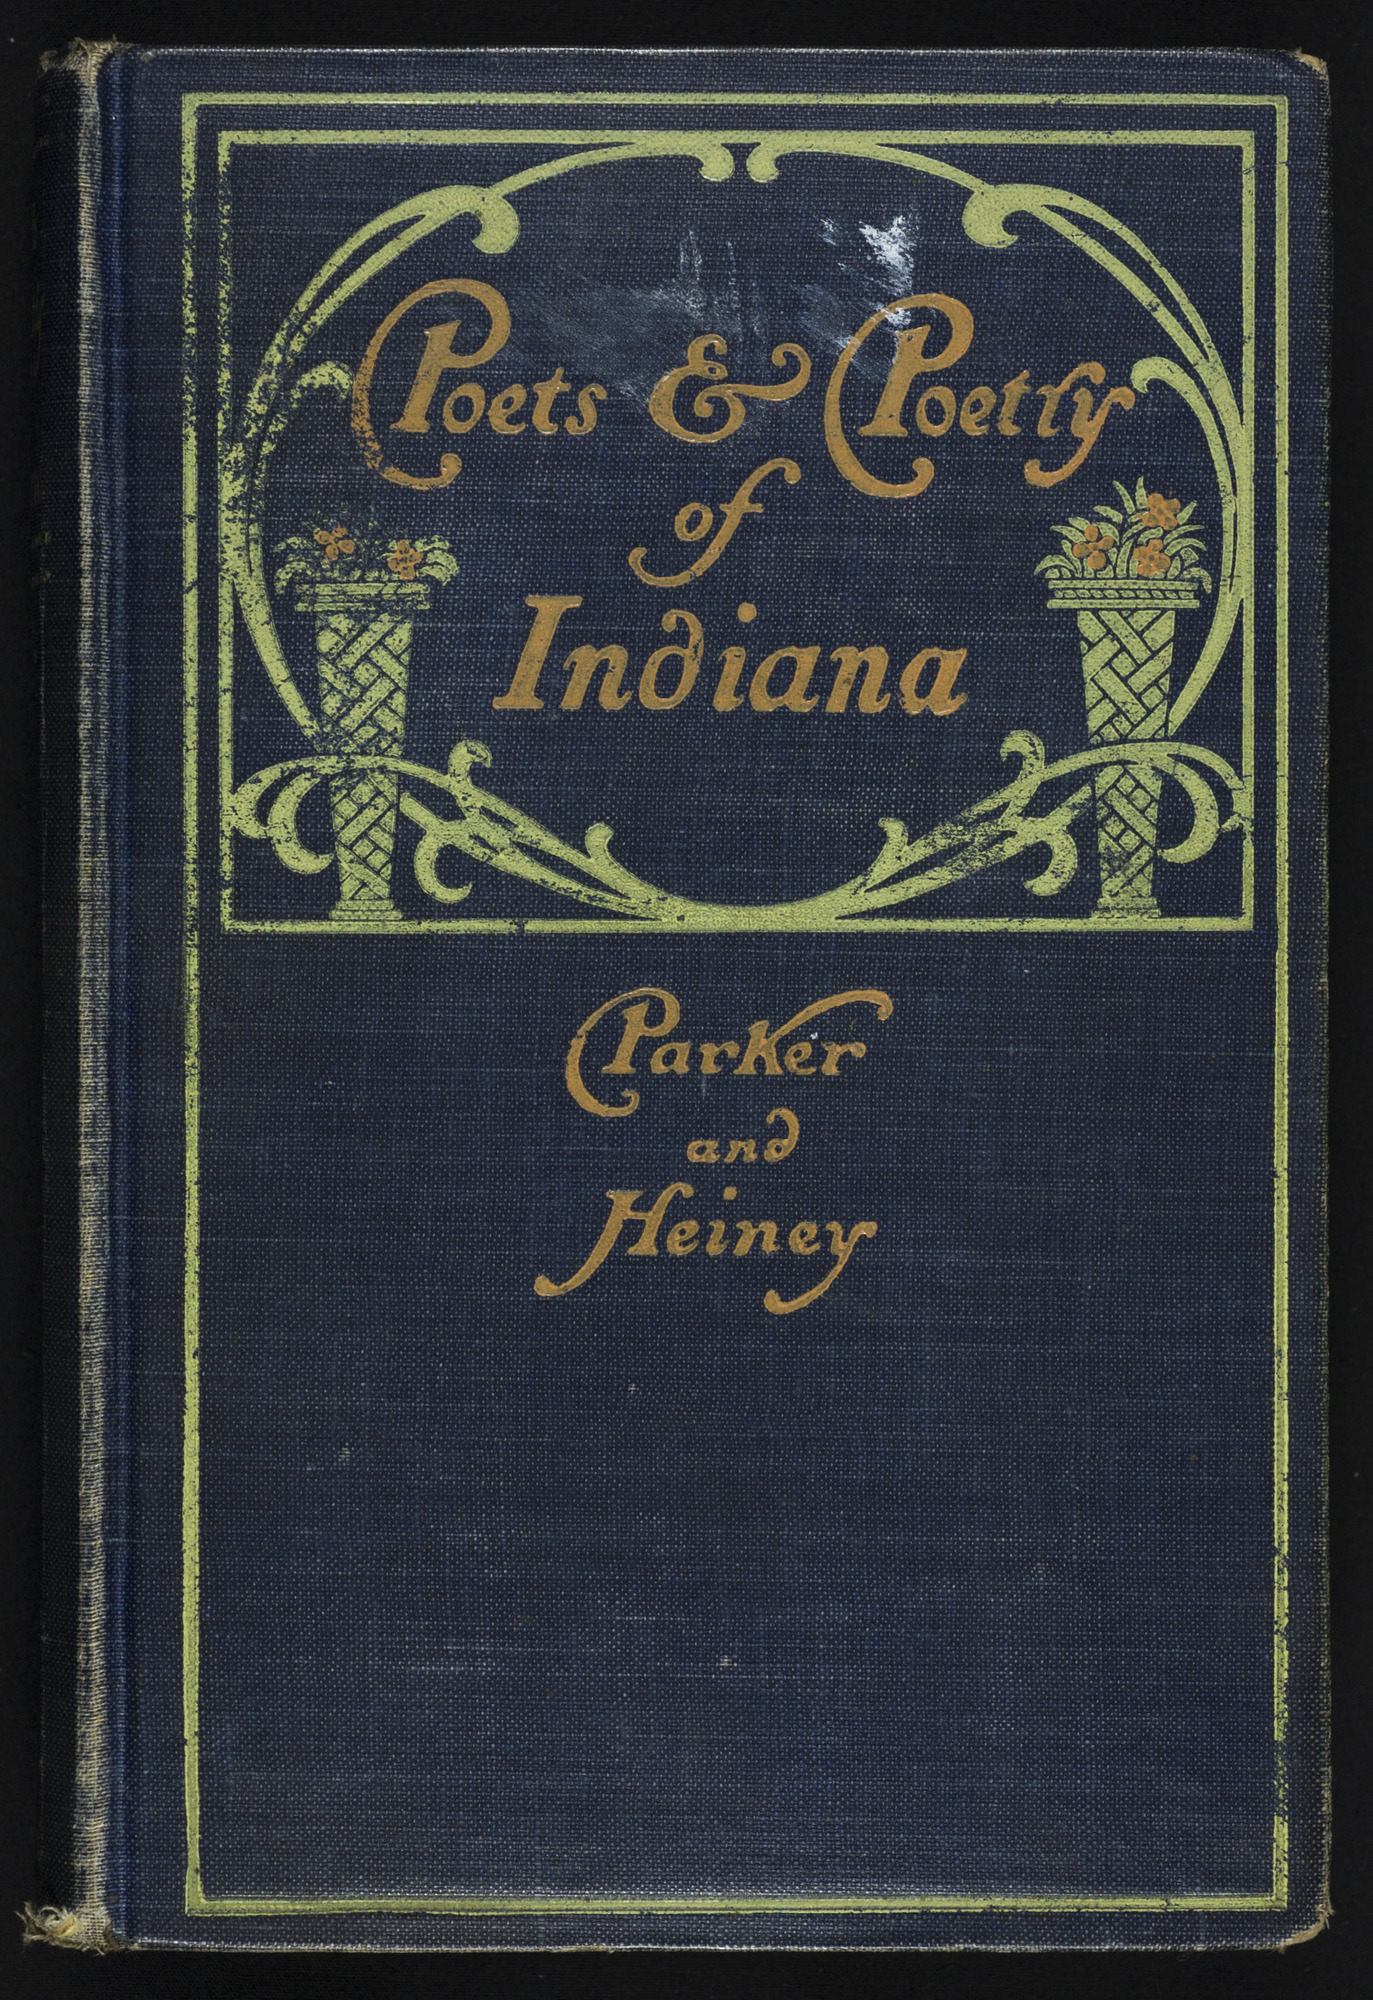 Poets and Poetry of Indiana:  A Representative Collection of the Poetry of Indiana During the First Hundred Years of Its History as Territory and State, 1800 to 1900.